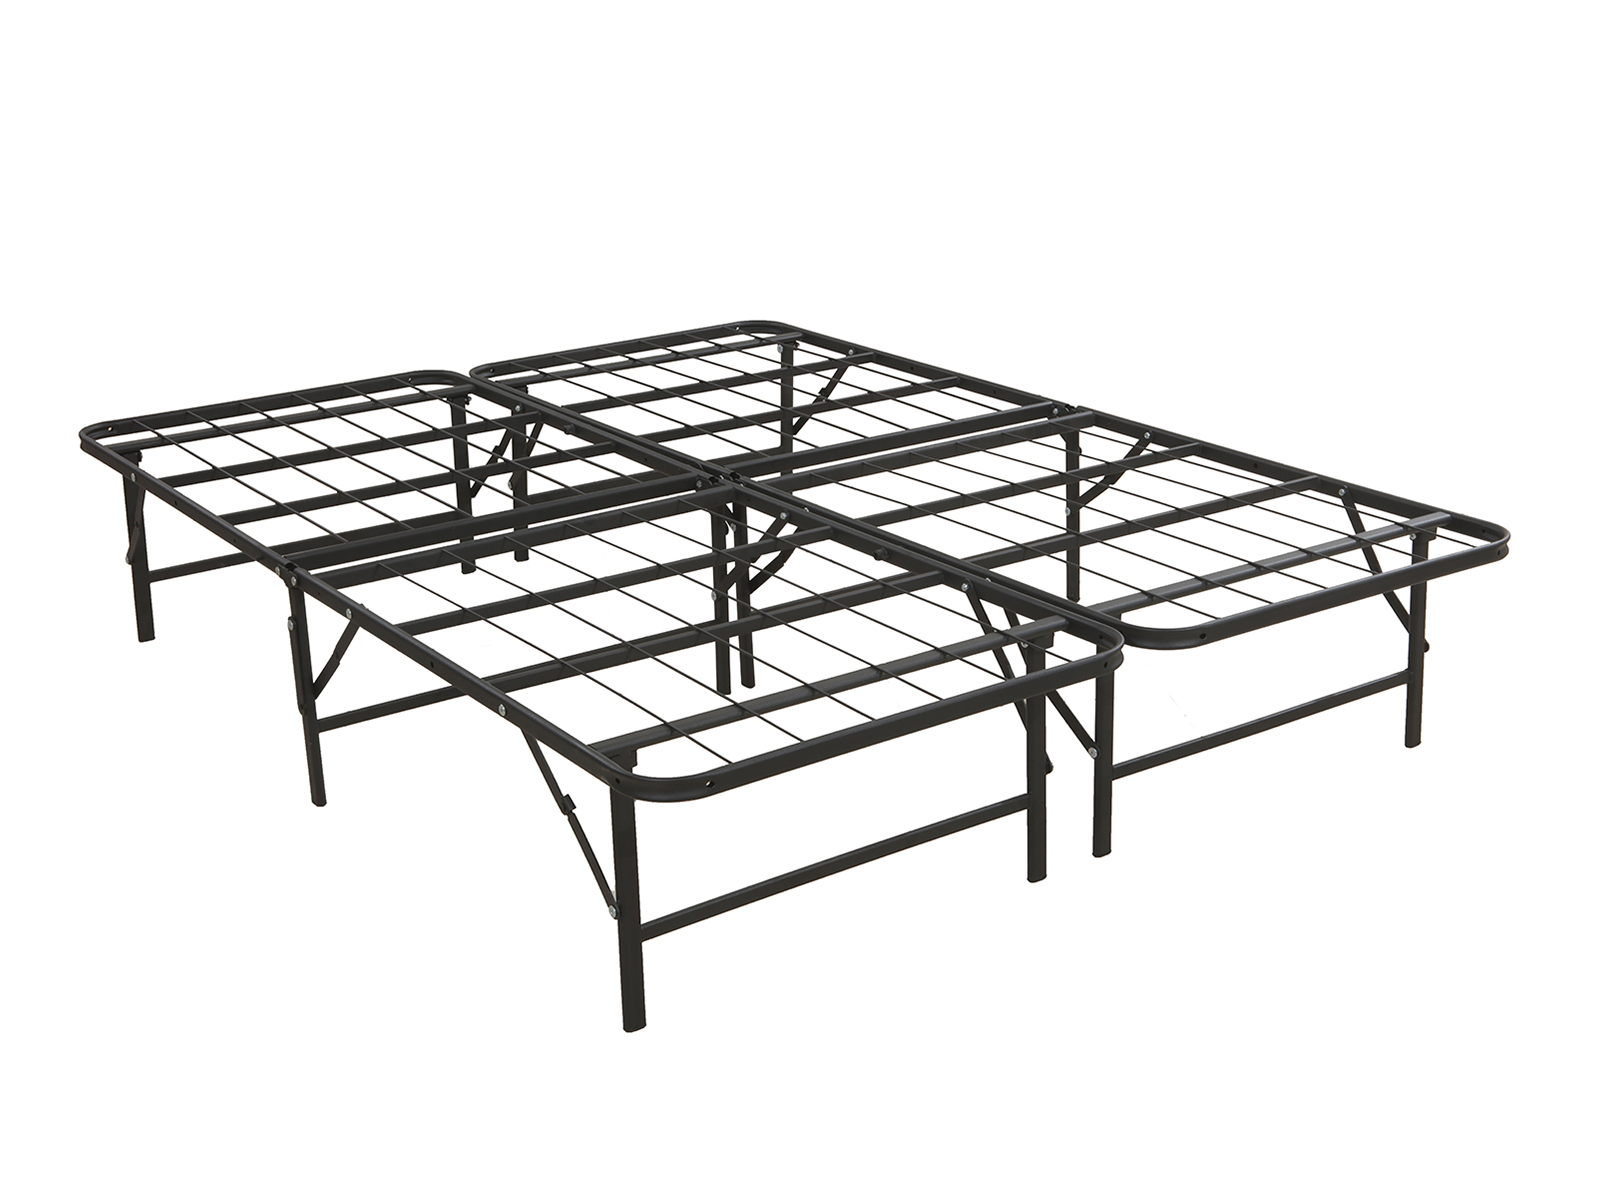 Mattress Firm Platform Bed Frame | Twin Extra Long | Deluxe Raised Metal | Easy Assembly